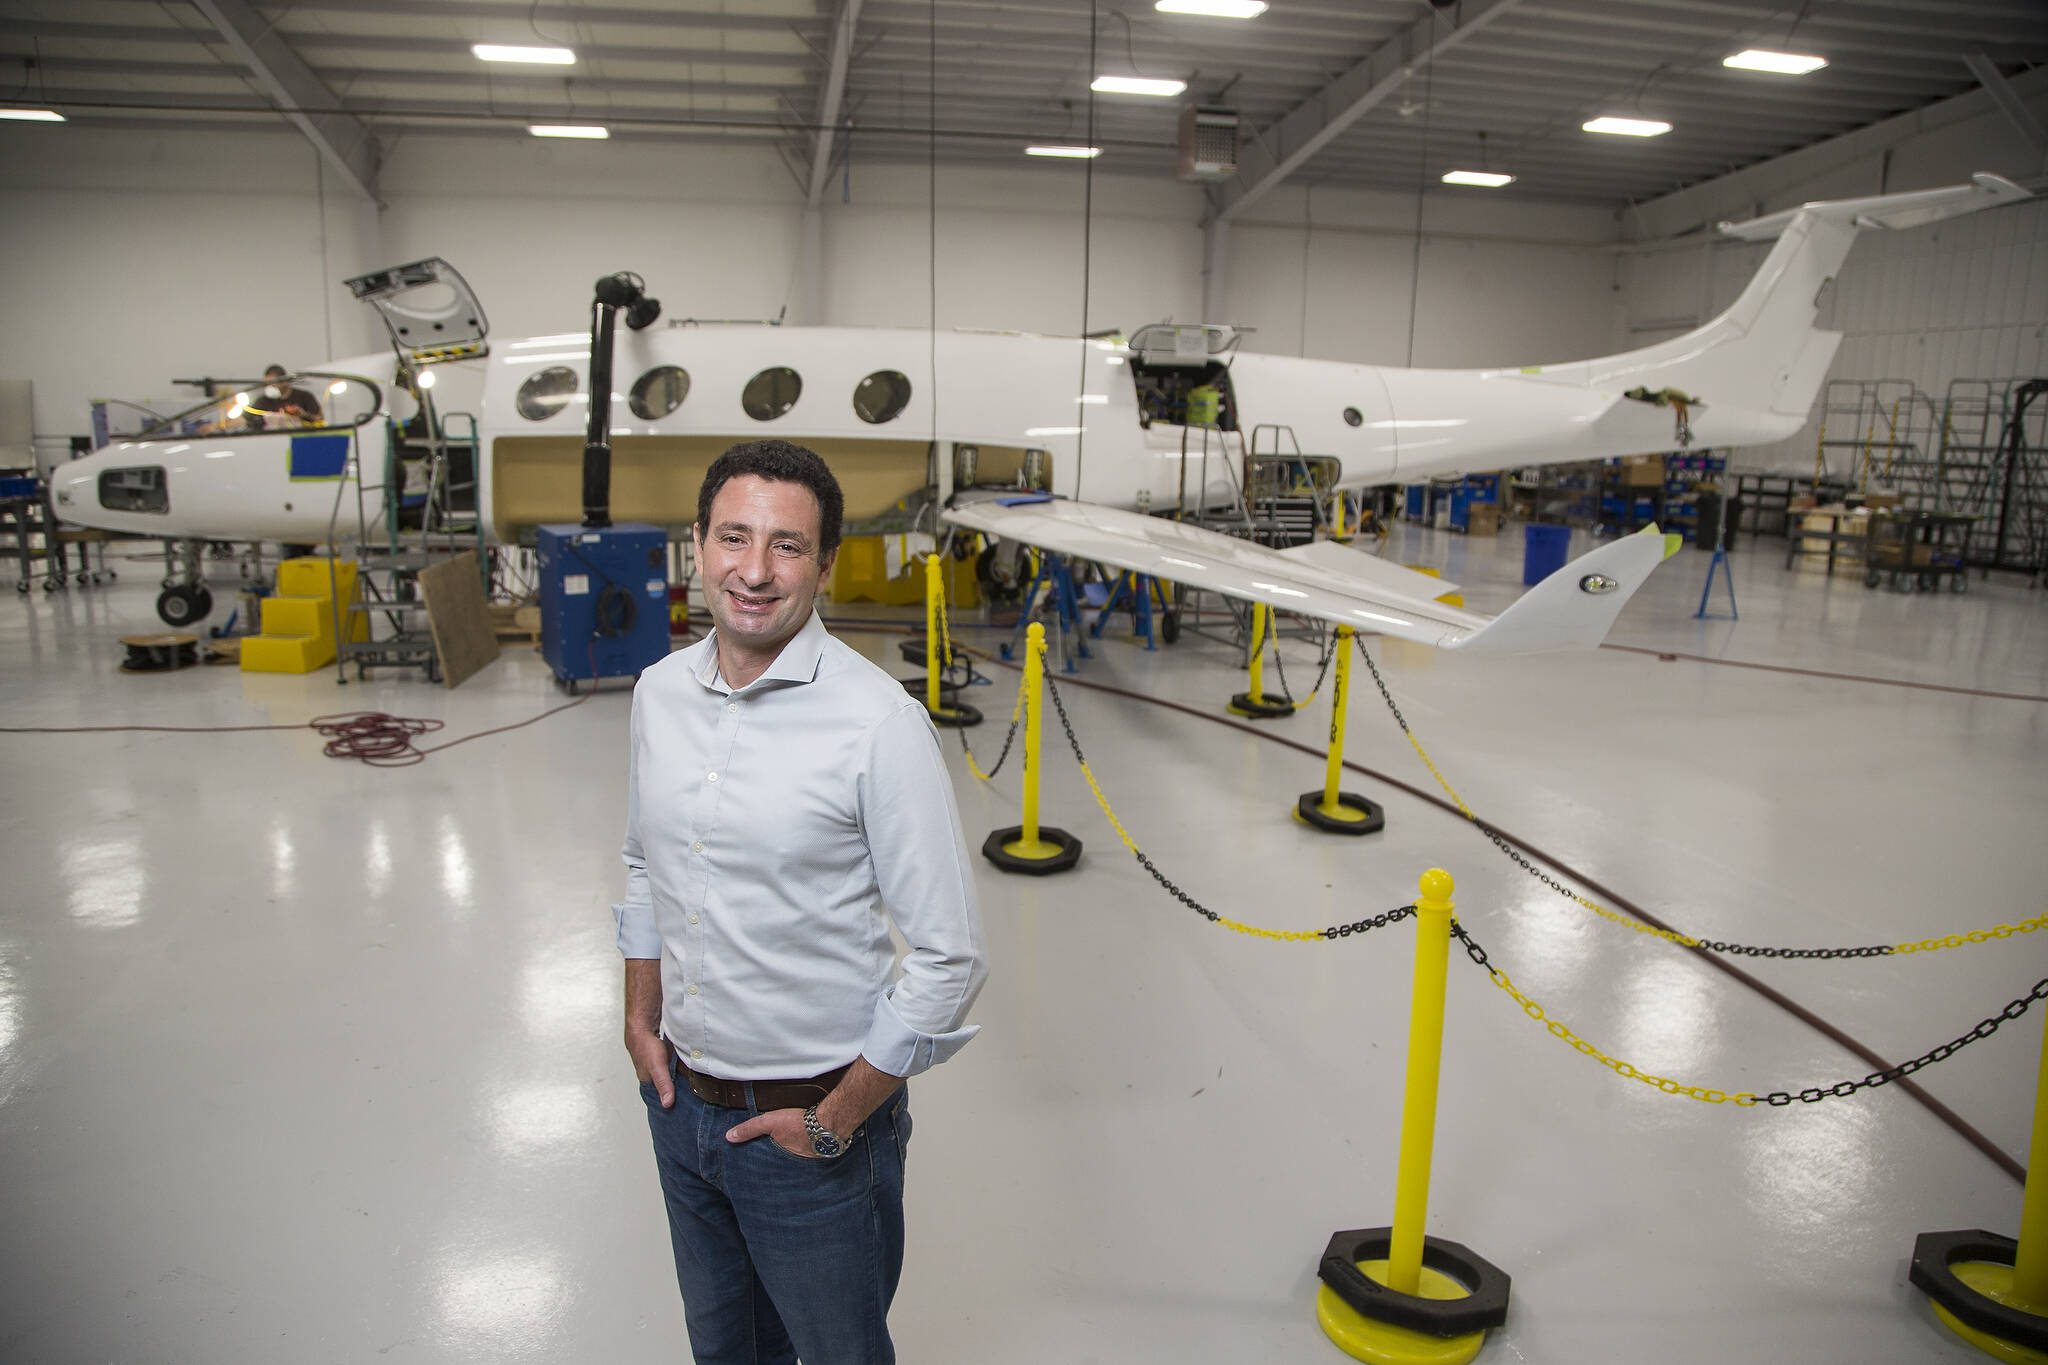 Eviation co-founder and former CEO Omer Bar-Yohay stands by the company’s all-electric airplane, Alice, at Eviation’s plant in Arlington in September. (Andy Bronson / Herald file)